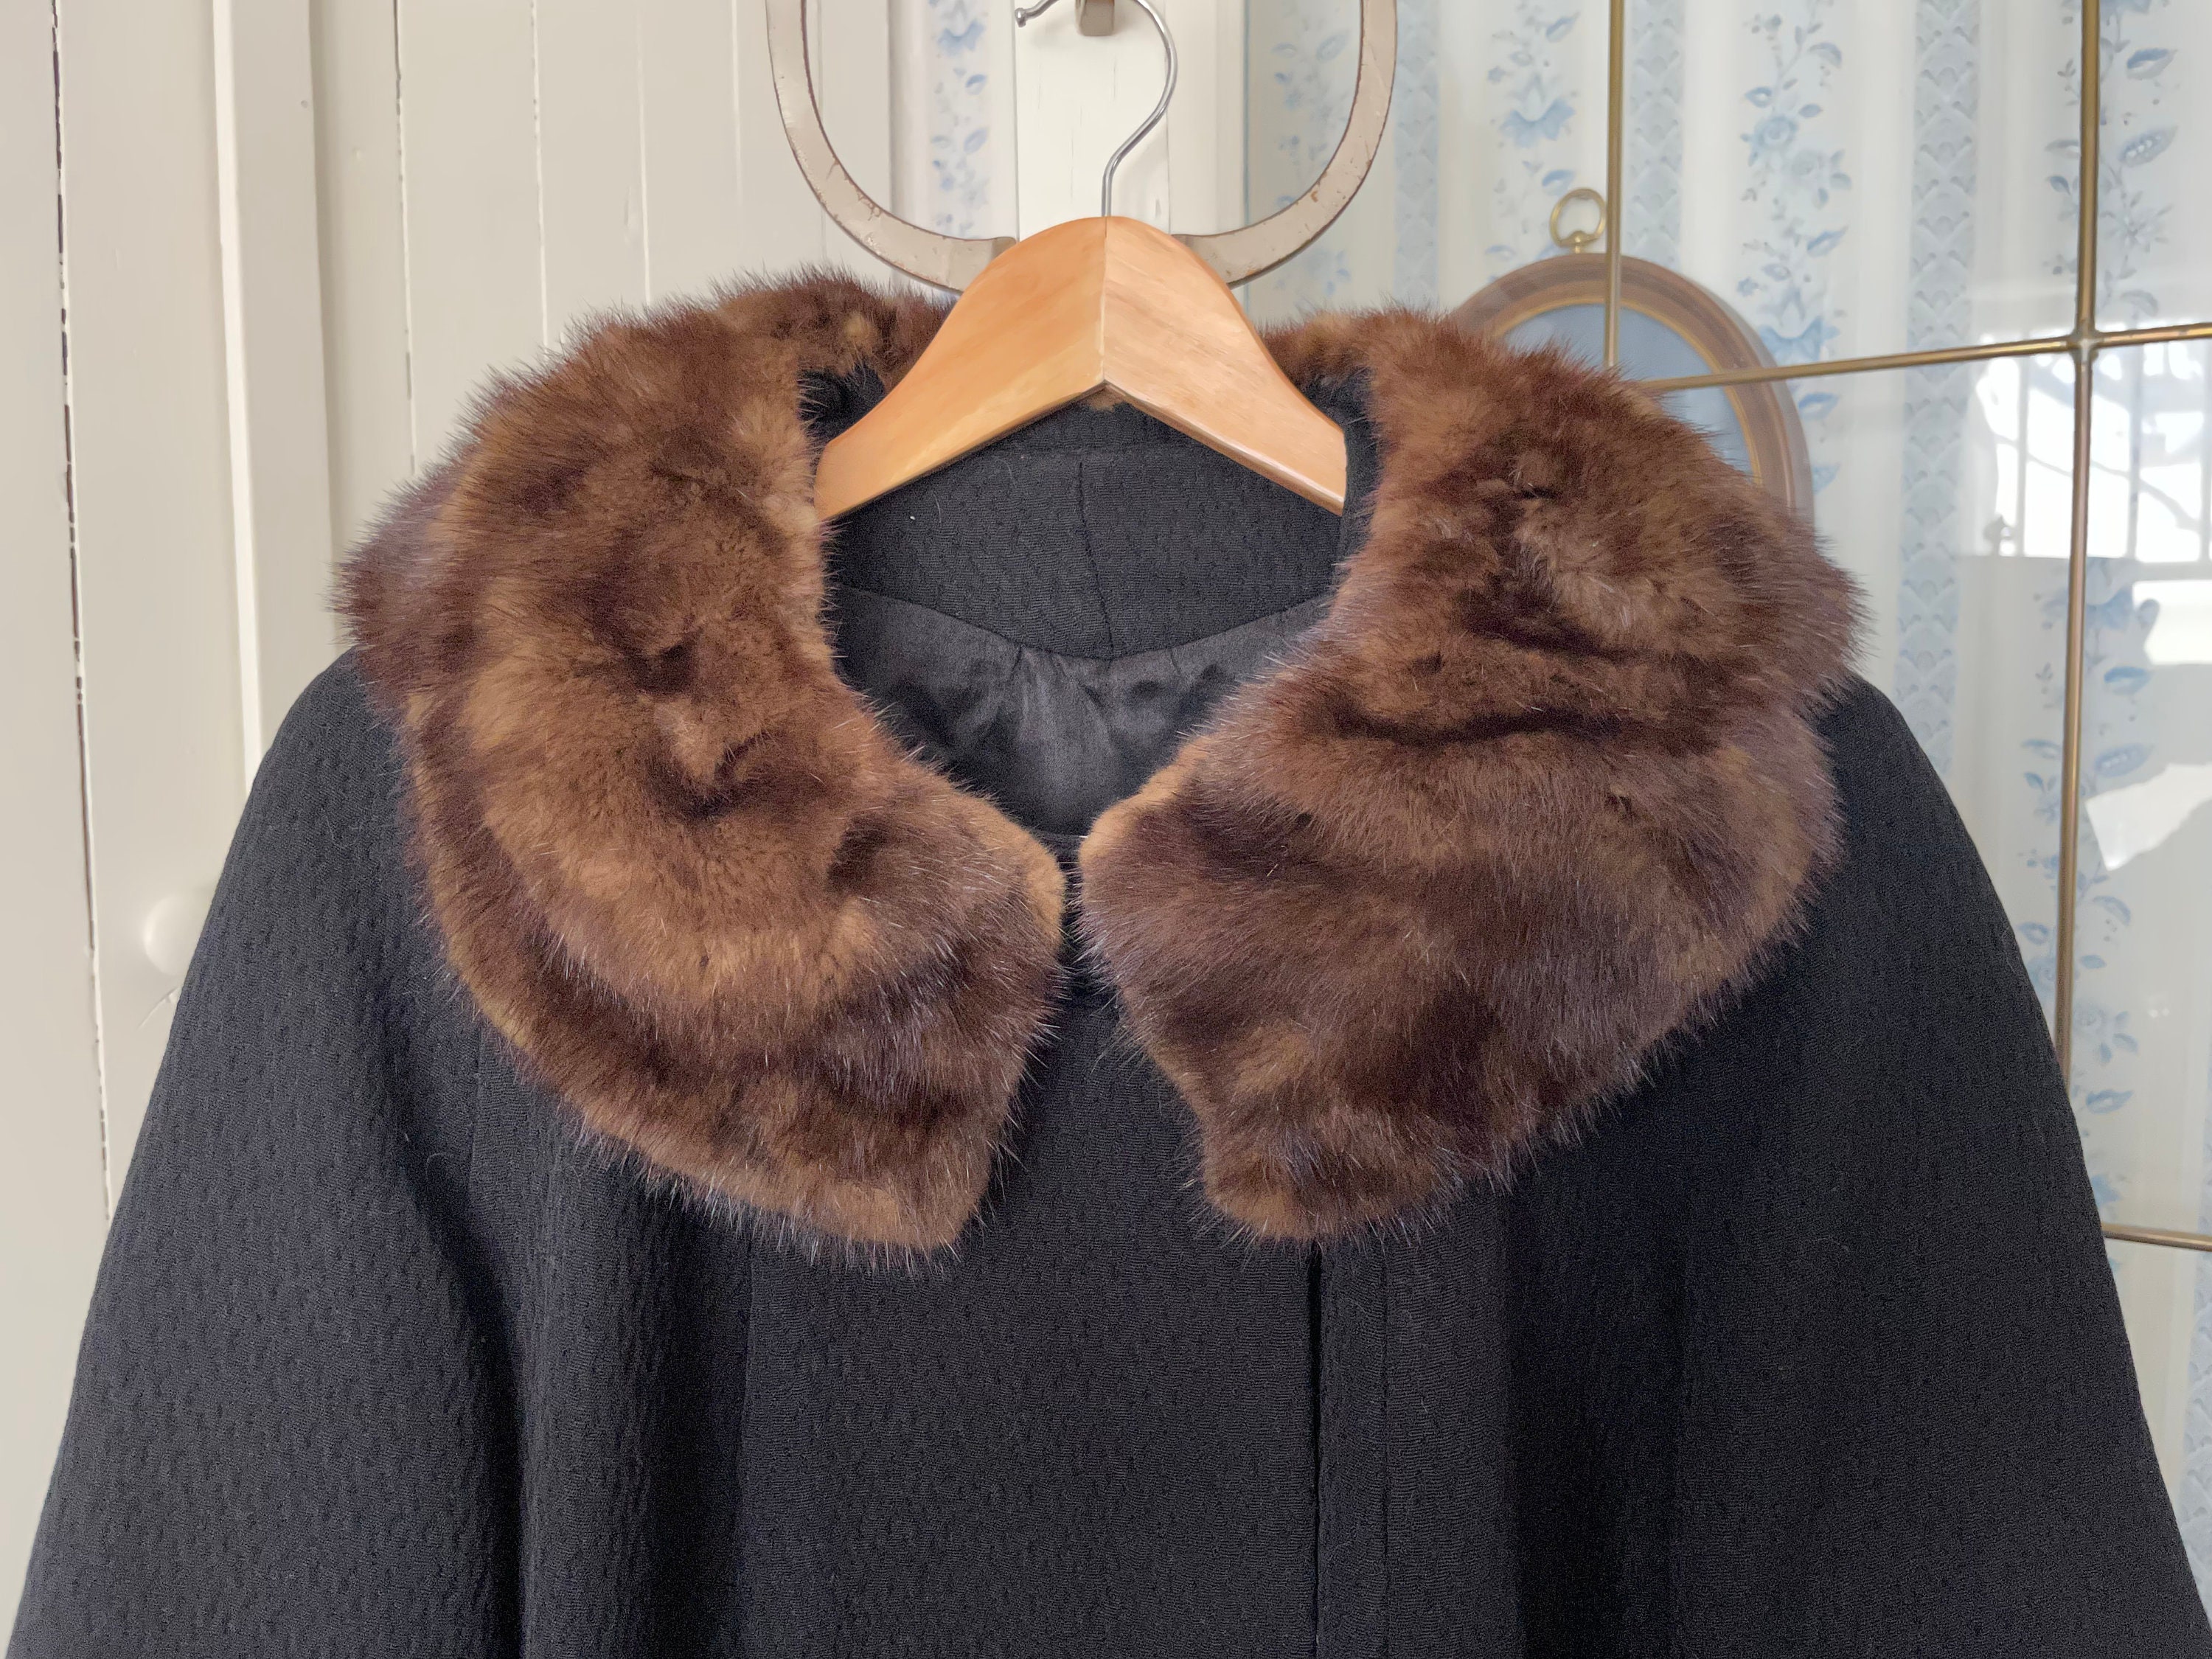 PREOWNED DARK TOURMALINE MINK FUR JACKET - BRAND NEW LINING! – The Real Fur  Deal